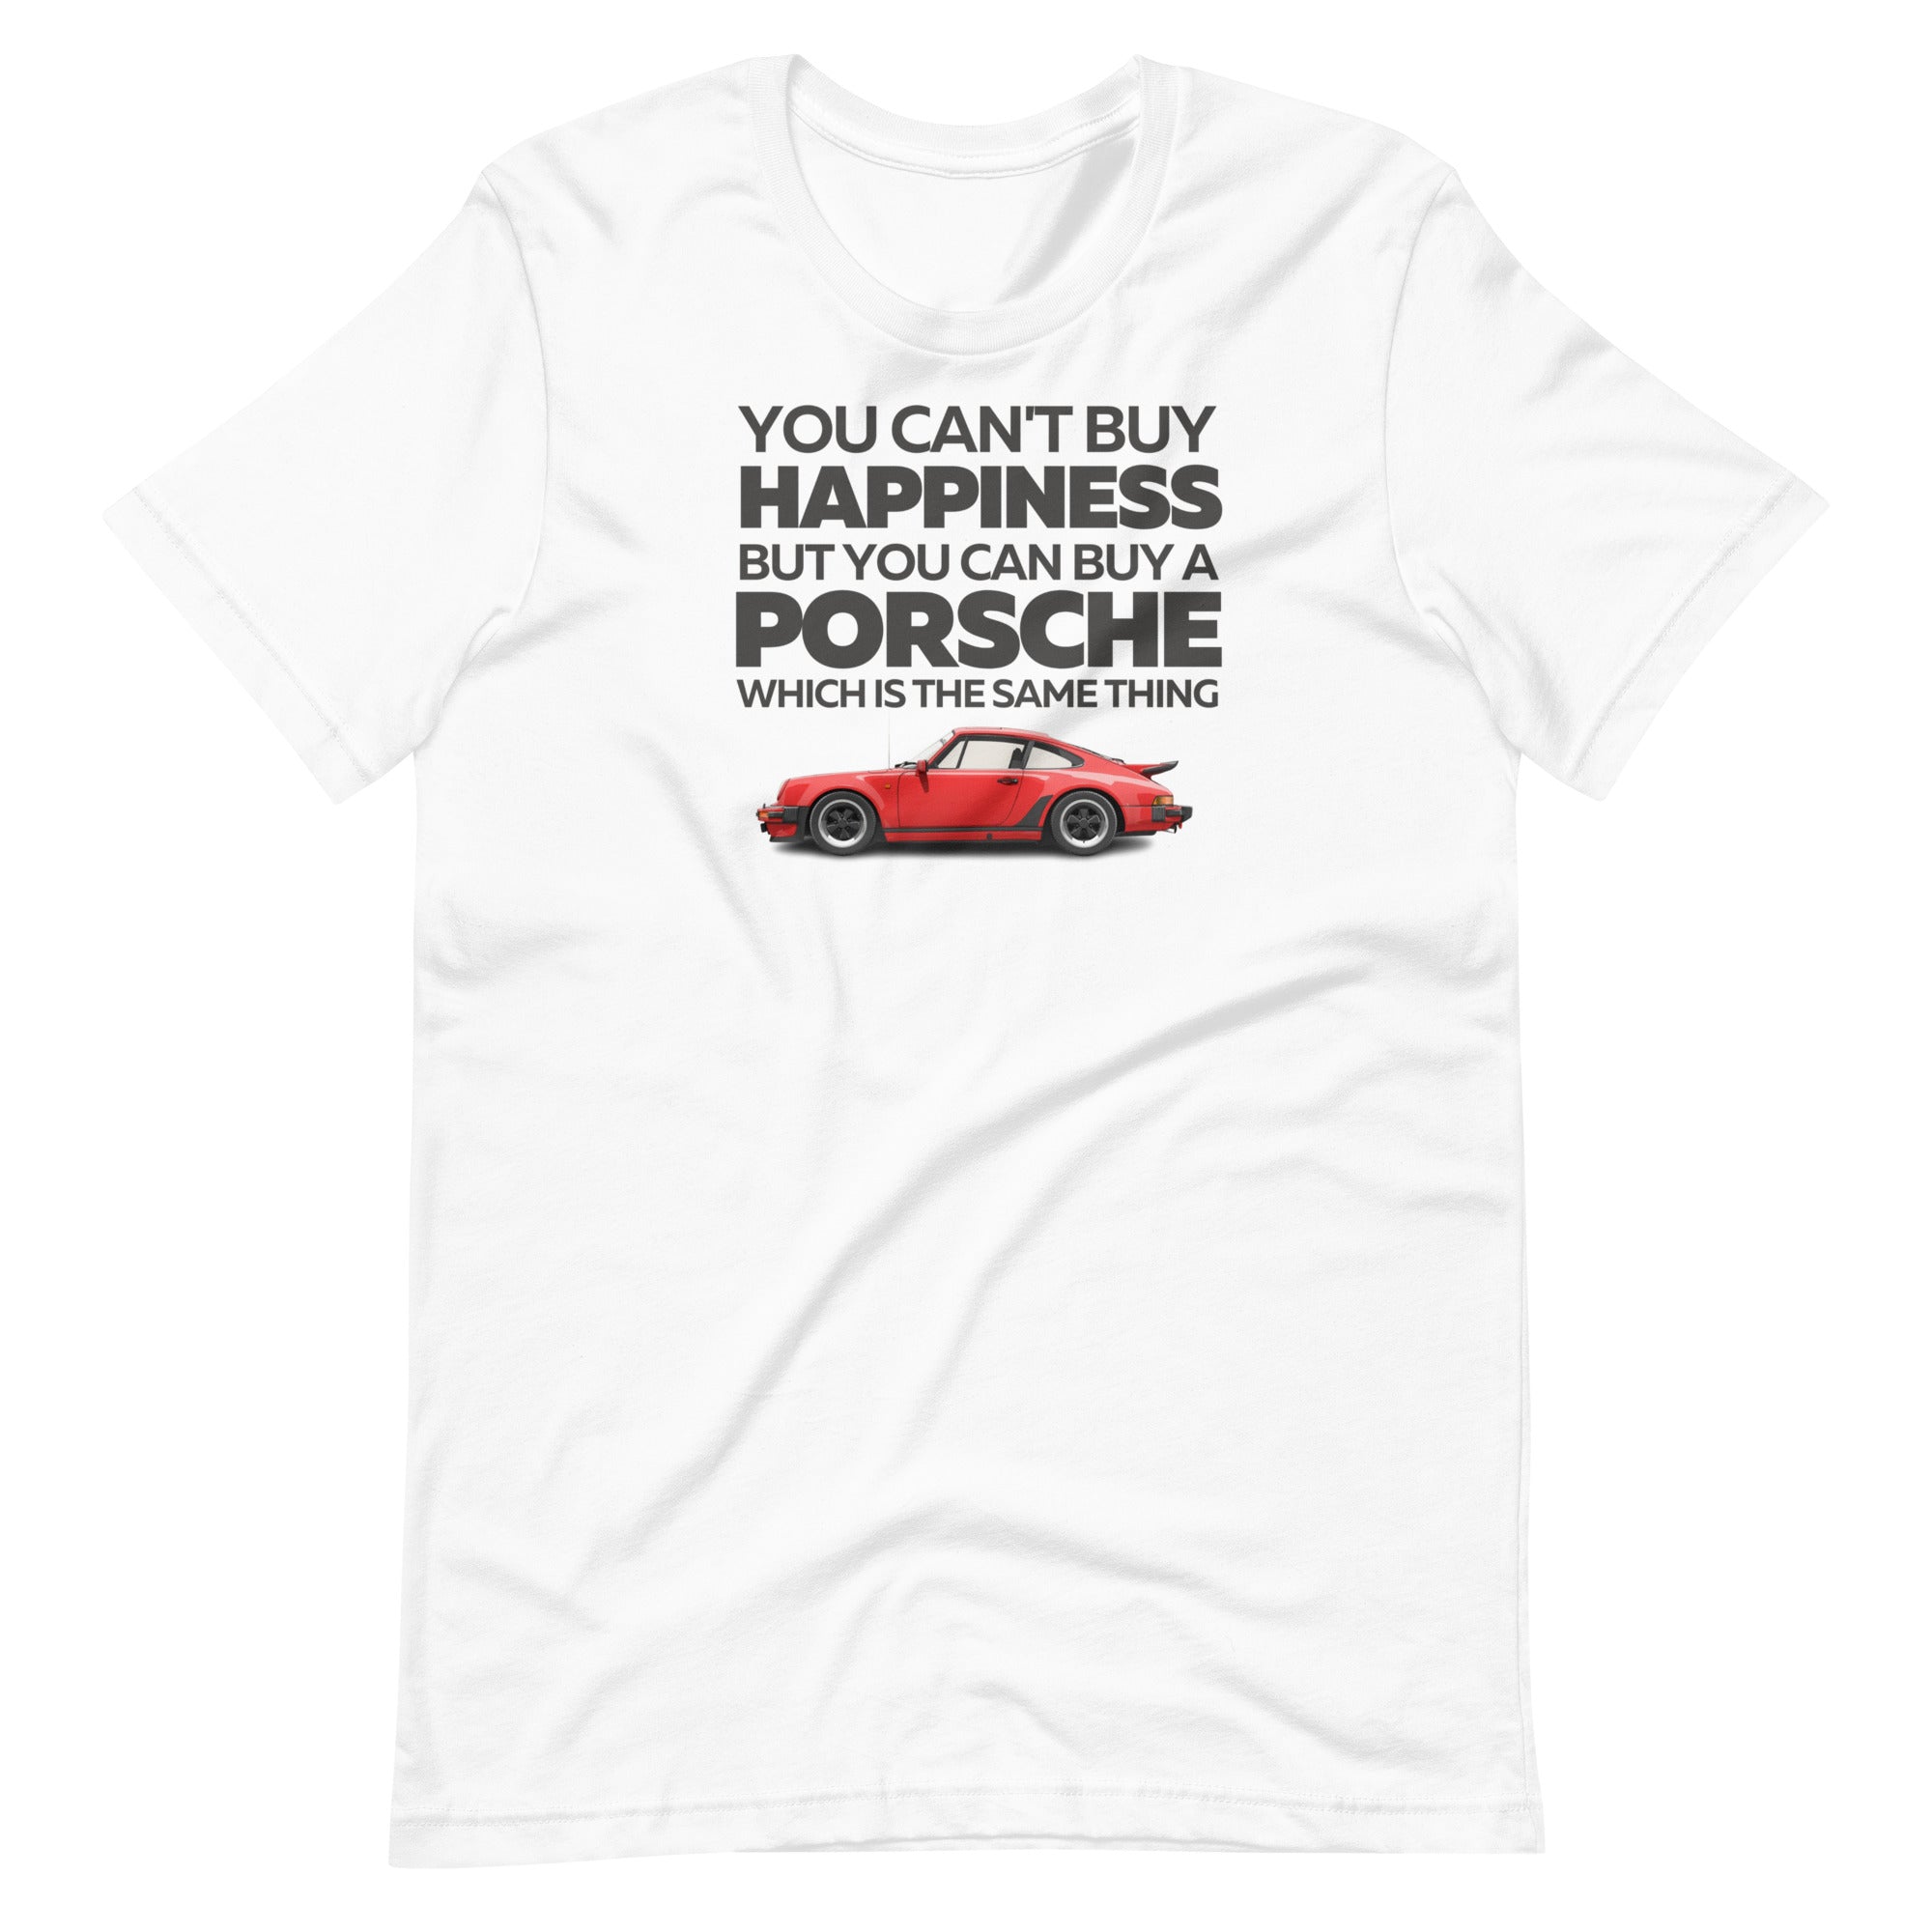 You Can't Buy Happiness - Porsche